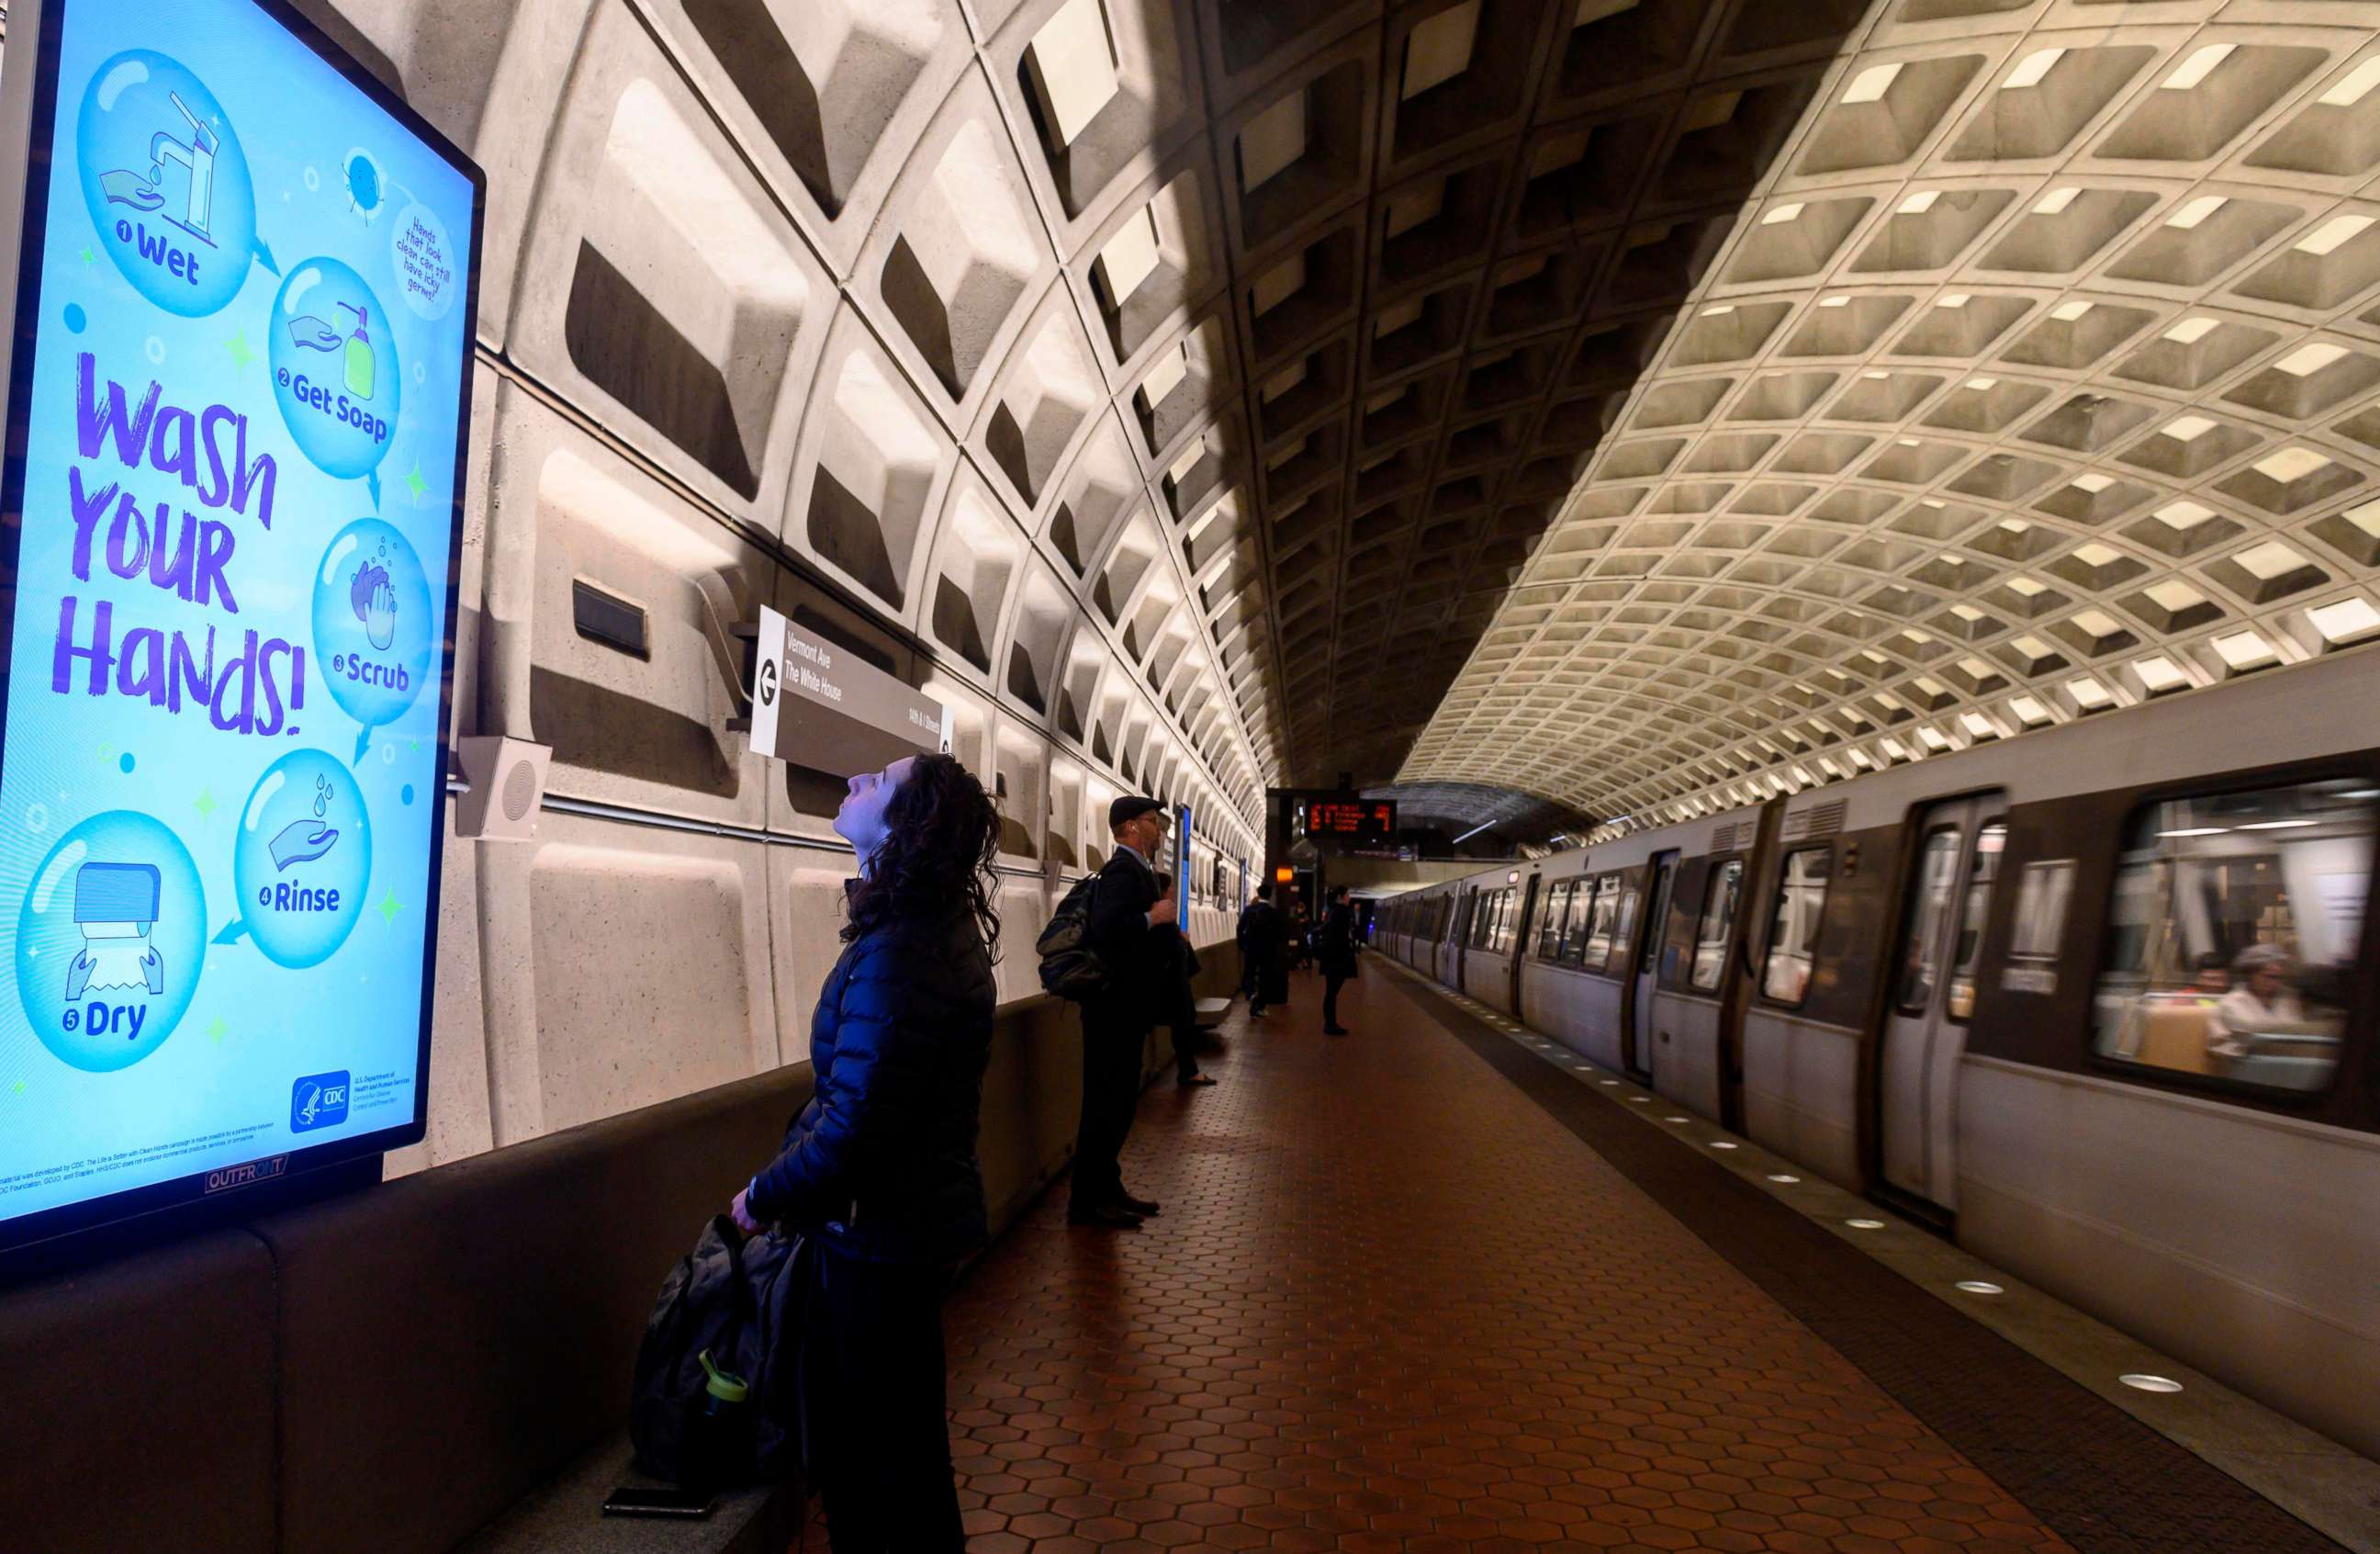 PHOTO: A woman reads a public awareness sign in response to the novel coronavirus outbreak, as she waits for a train in the Metro in Washington, D.C., on March 10, 2020. 